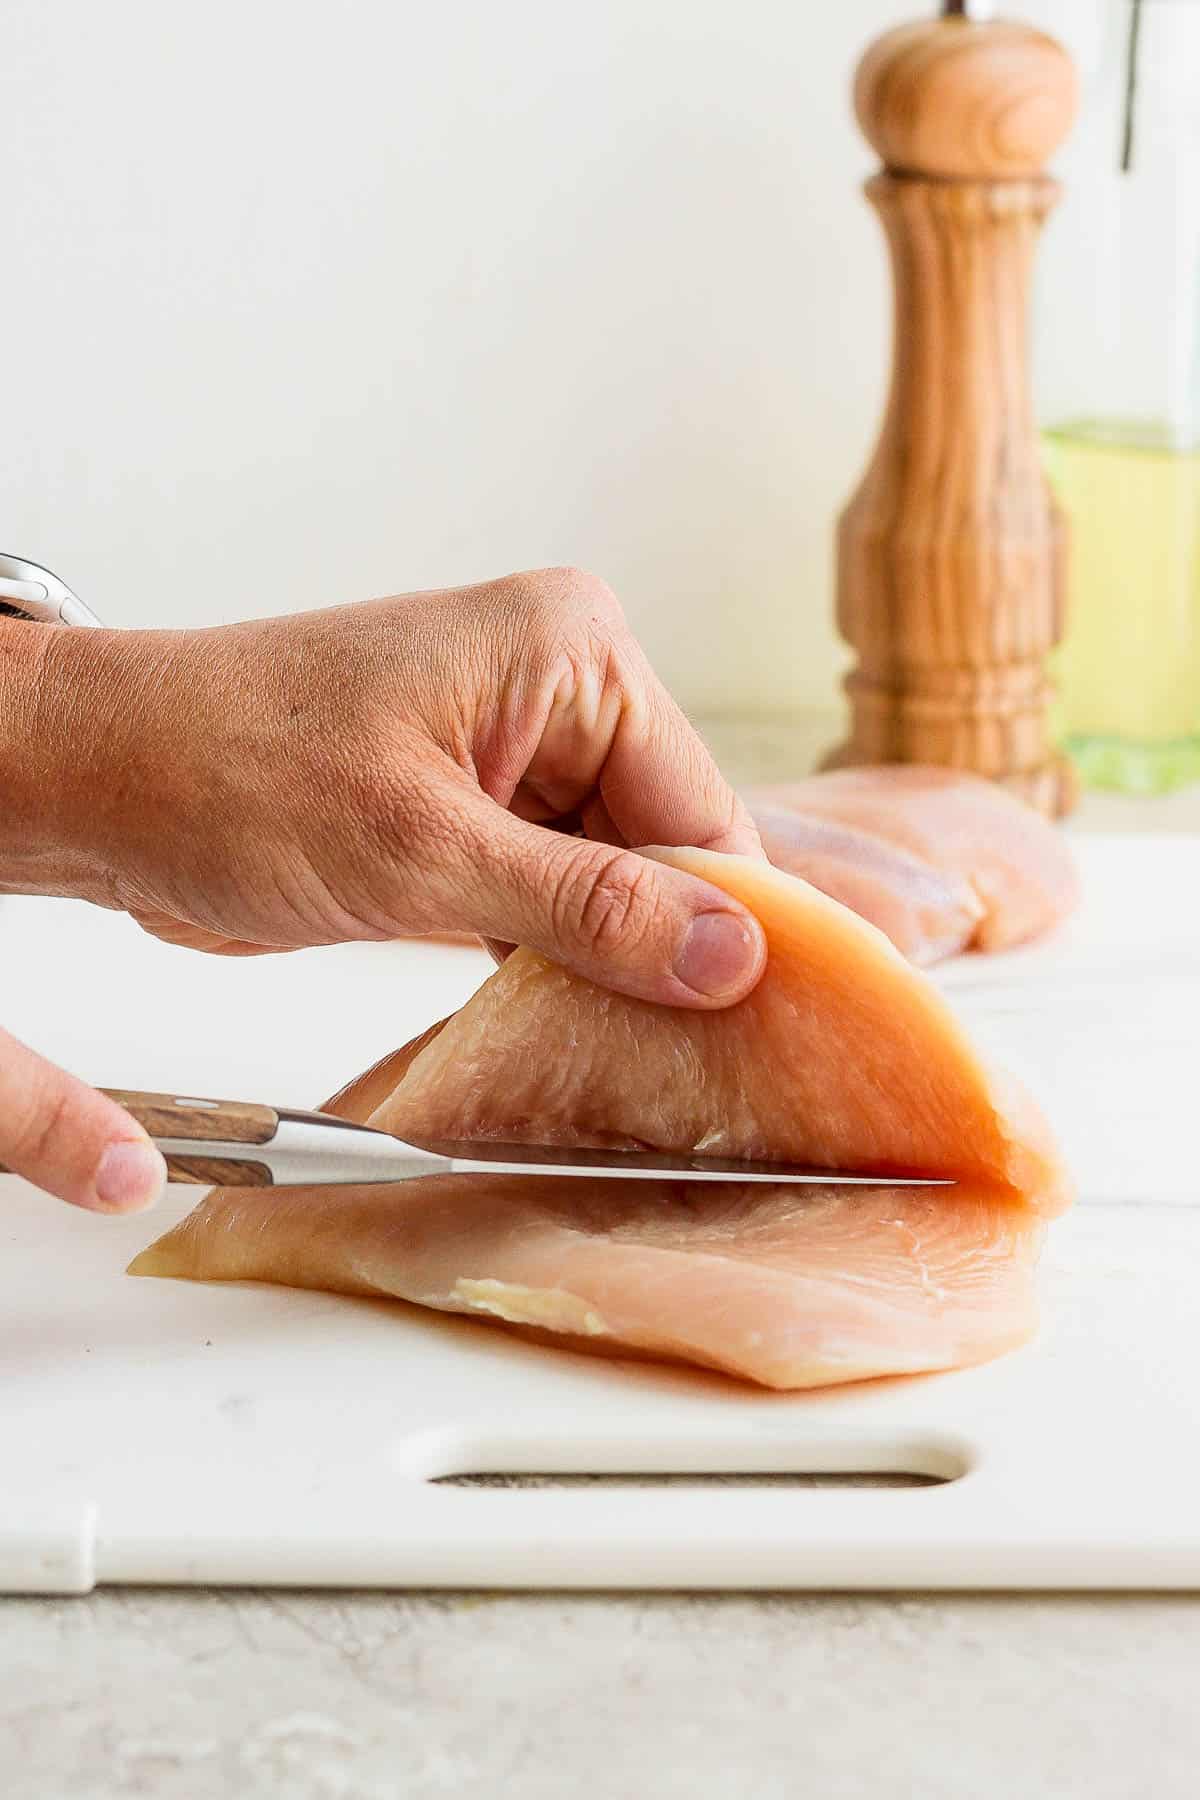 A chicken breast being cut, lengthwise, to make chicken cutlets.